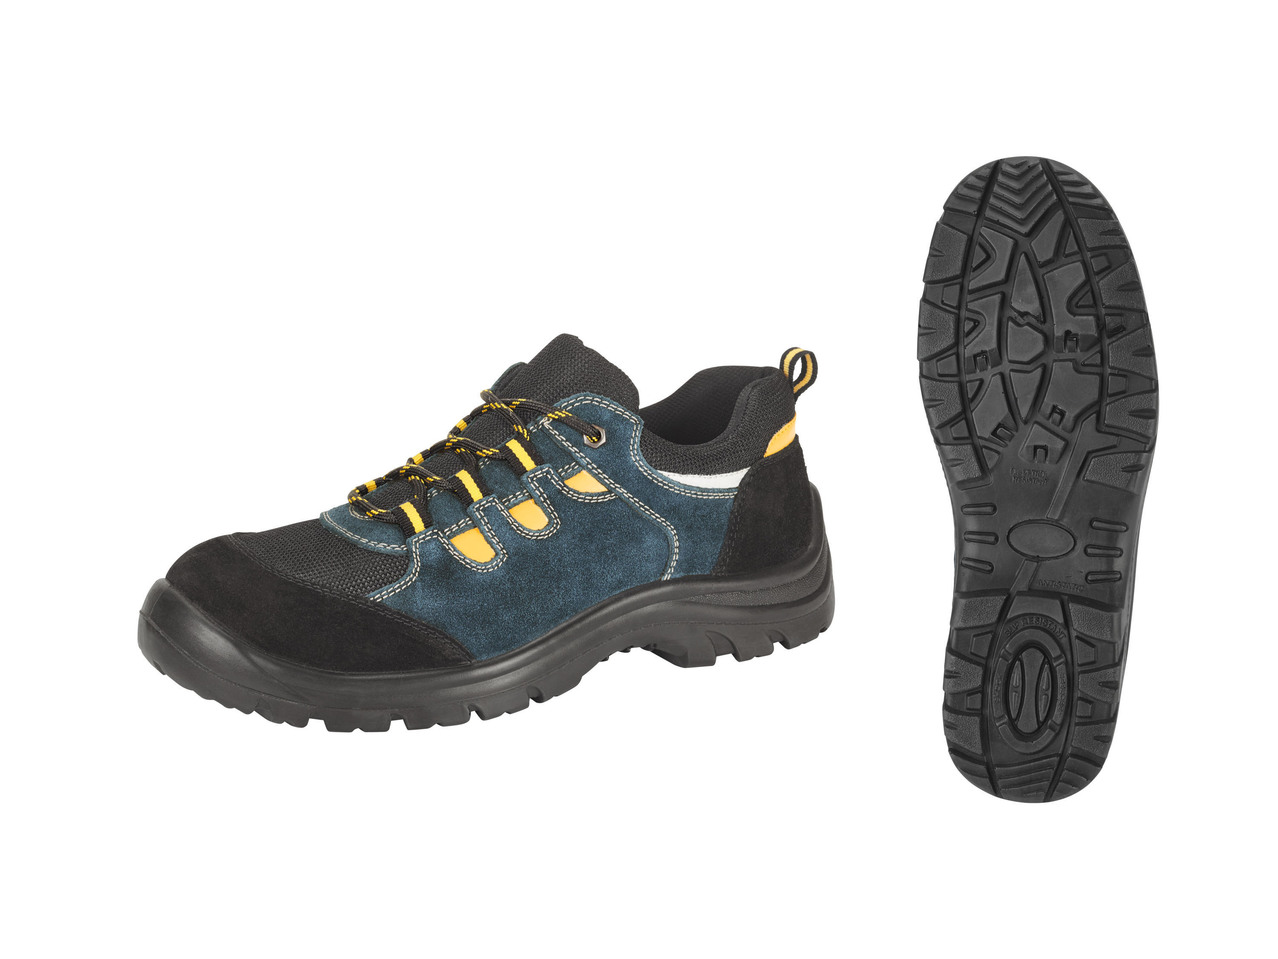 Men‘s Leather Safety Shoes or Boots